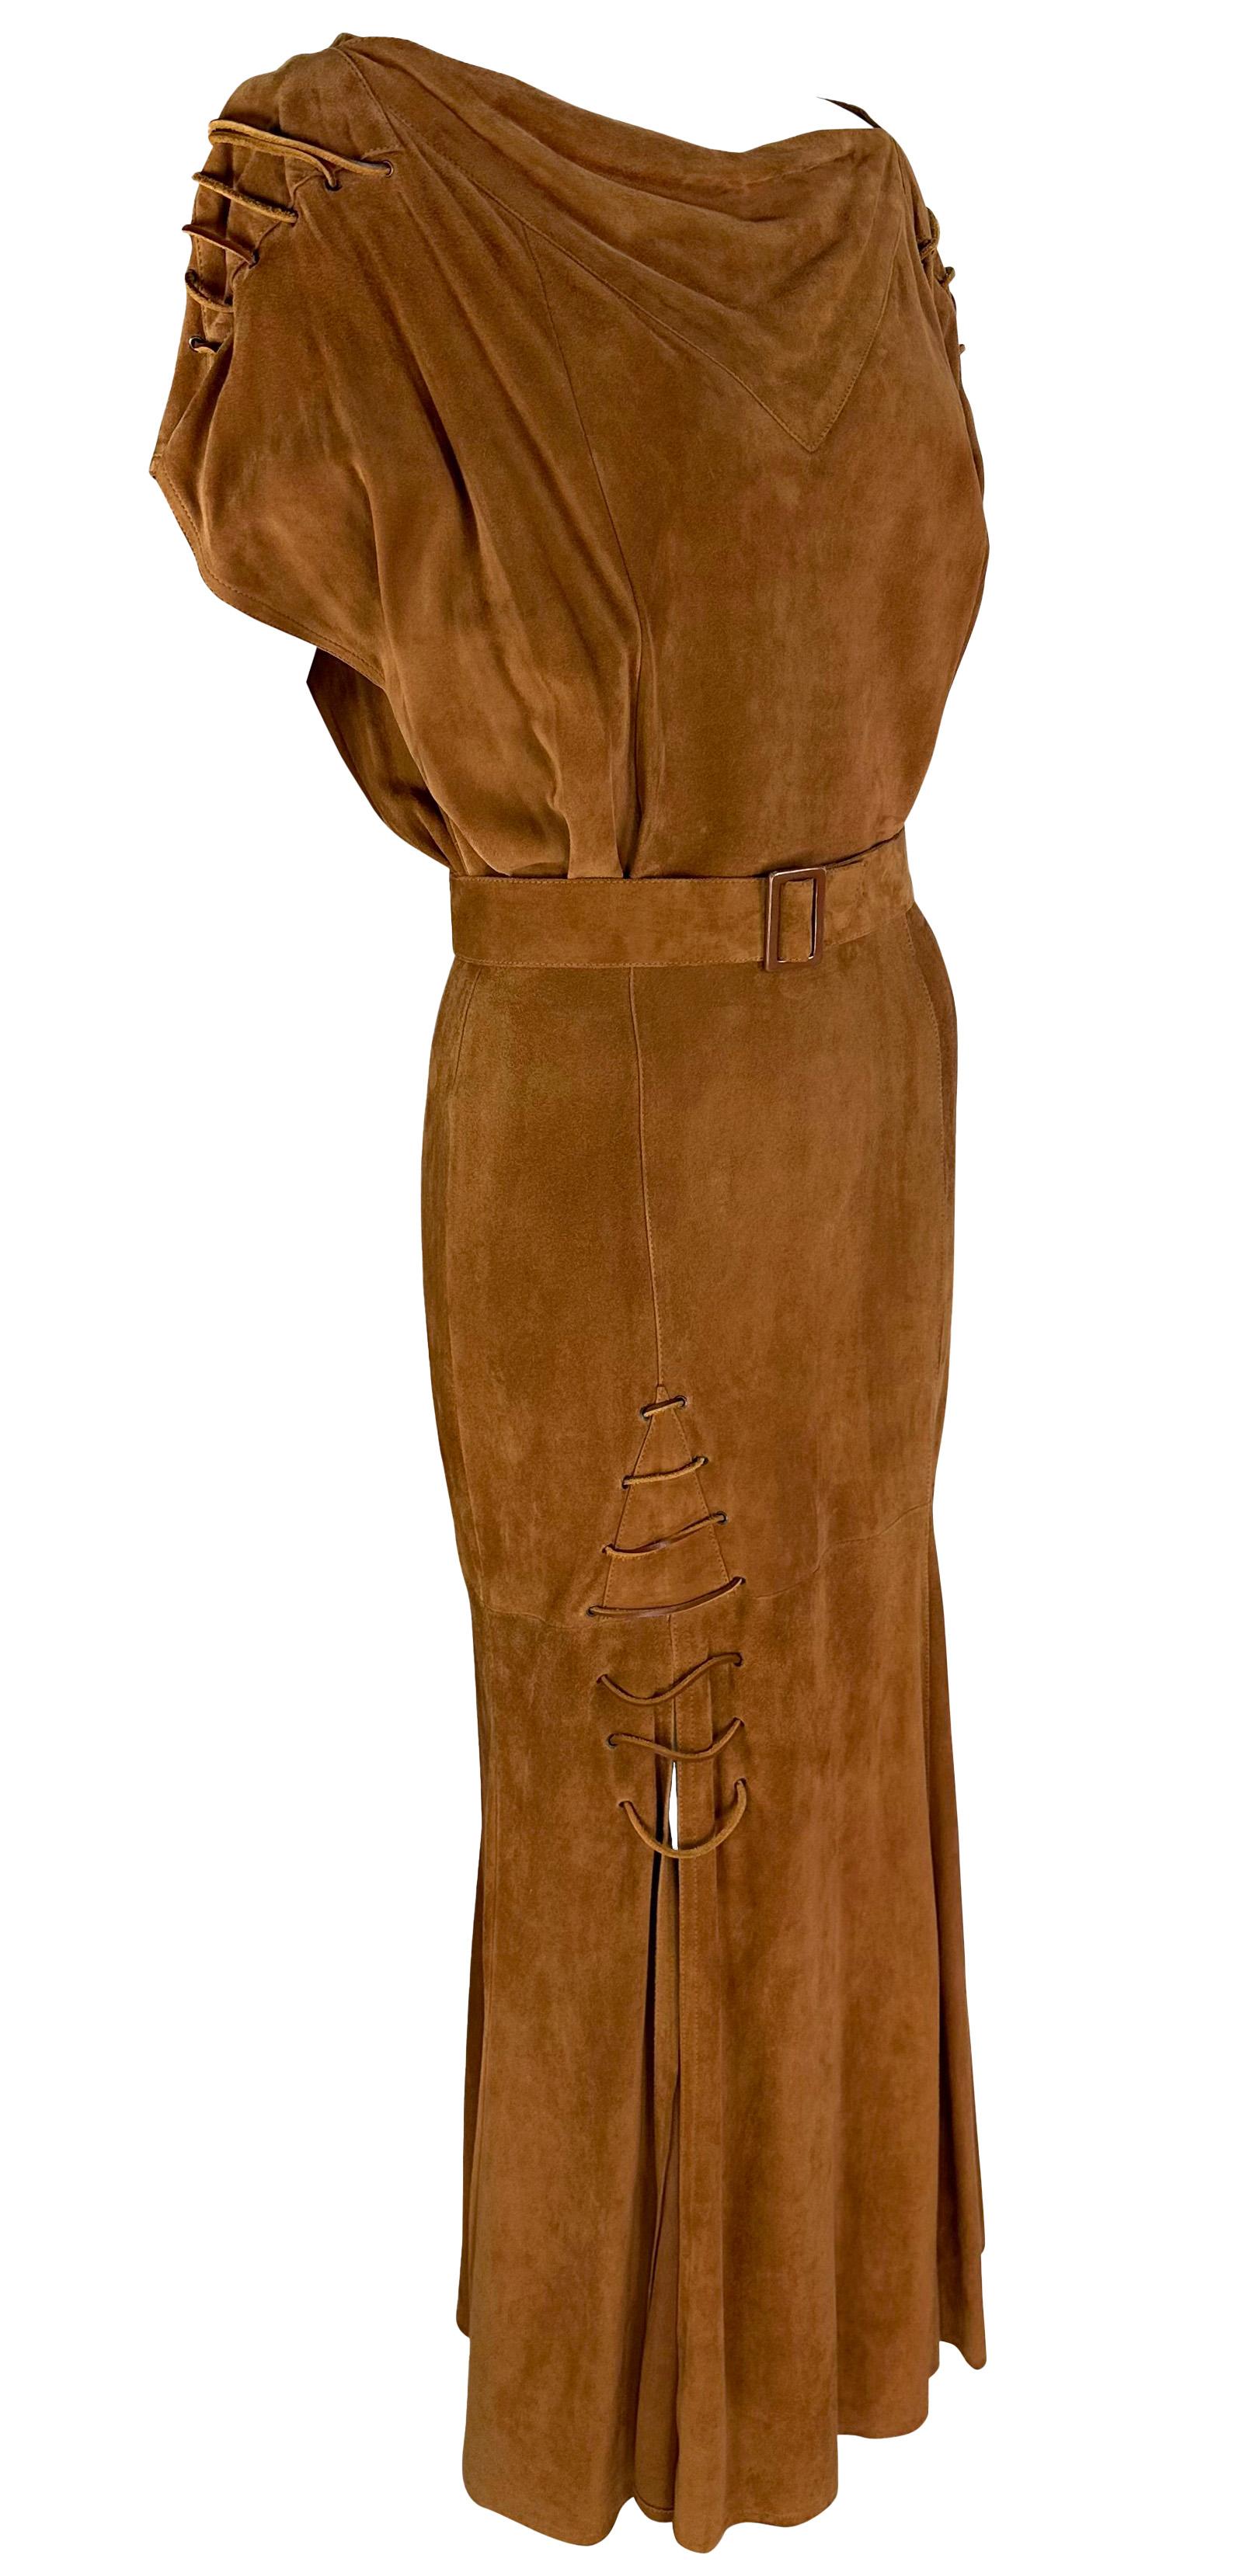 This brown maxi dress by Thierry Mugler, from the early 1980s, is made entirely of soft suede. It has a draped neckline and petal sleeves. Leather lace-up details appear at the shoulders and along the front slit, adding texture and visual interest.